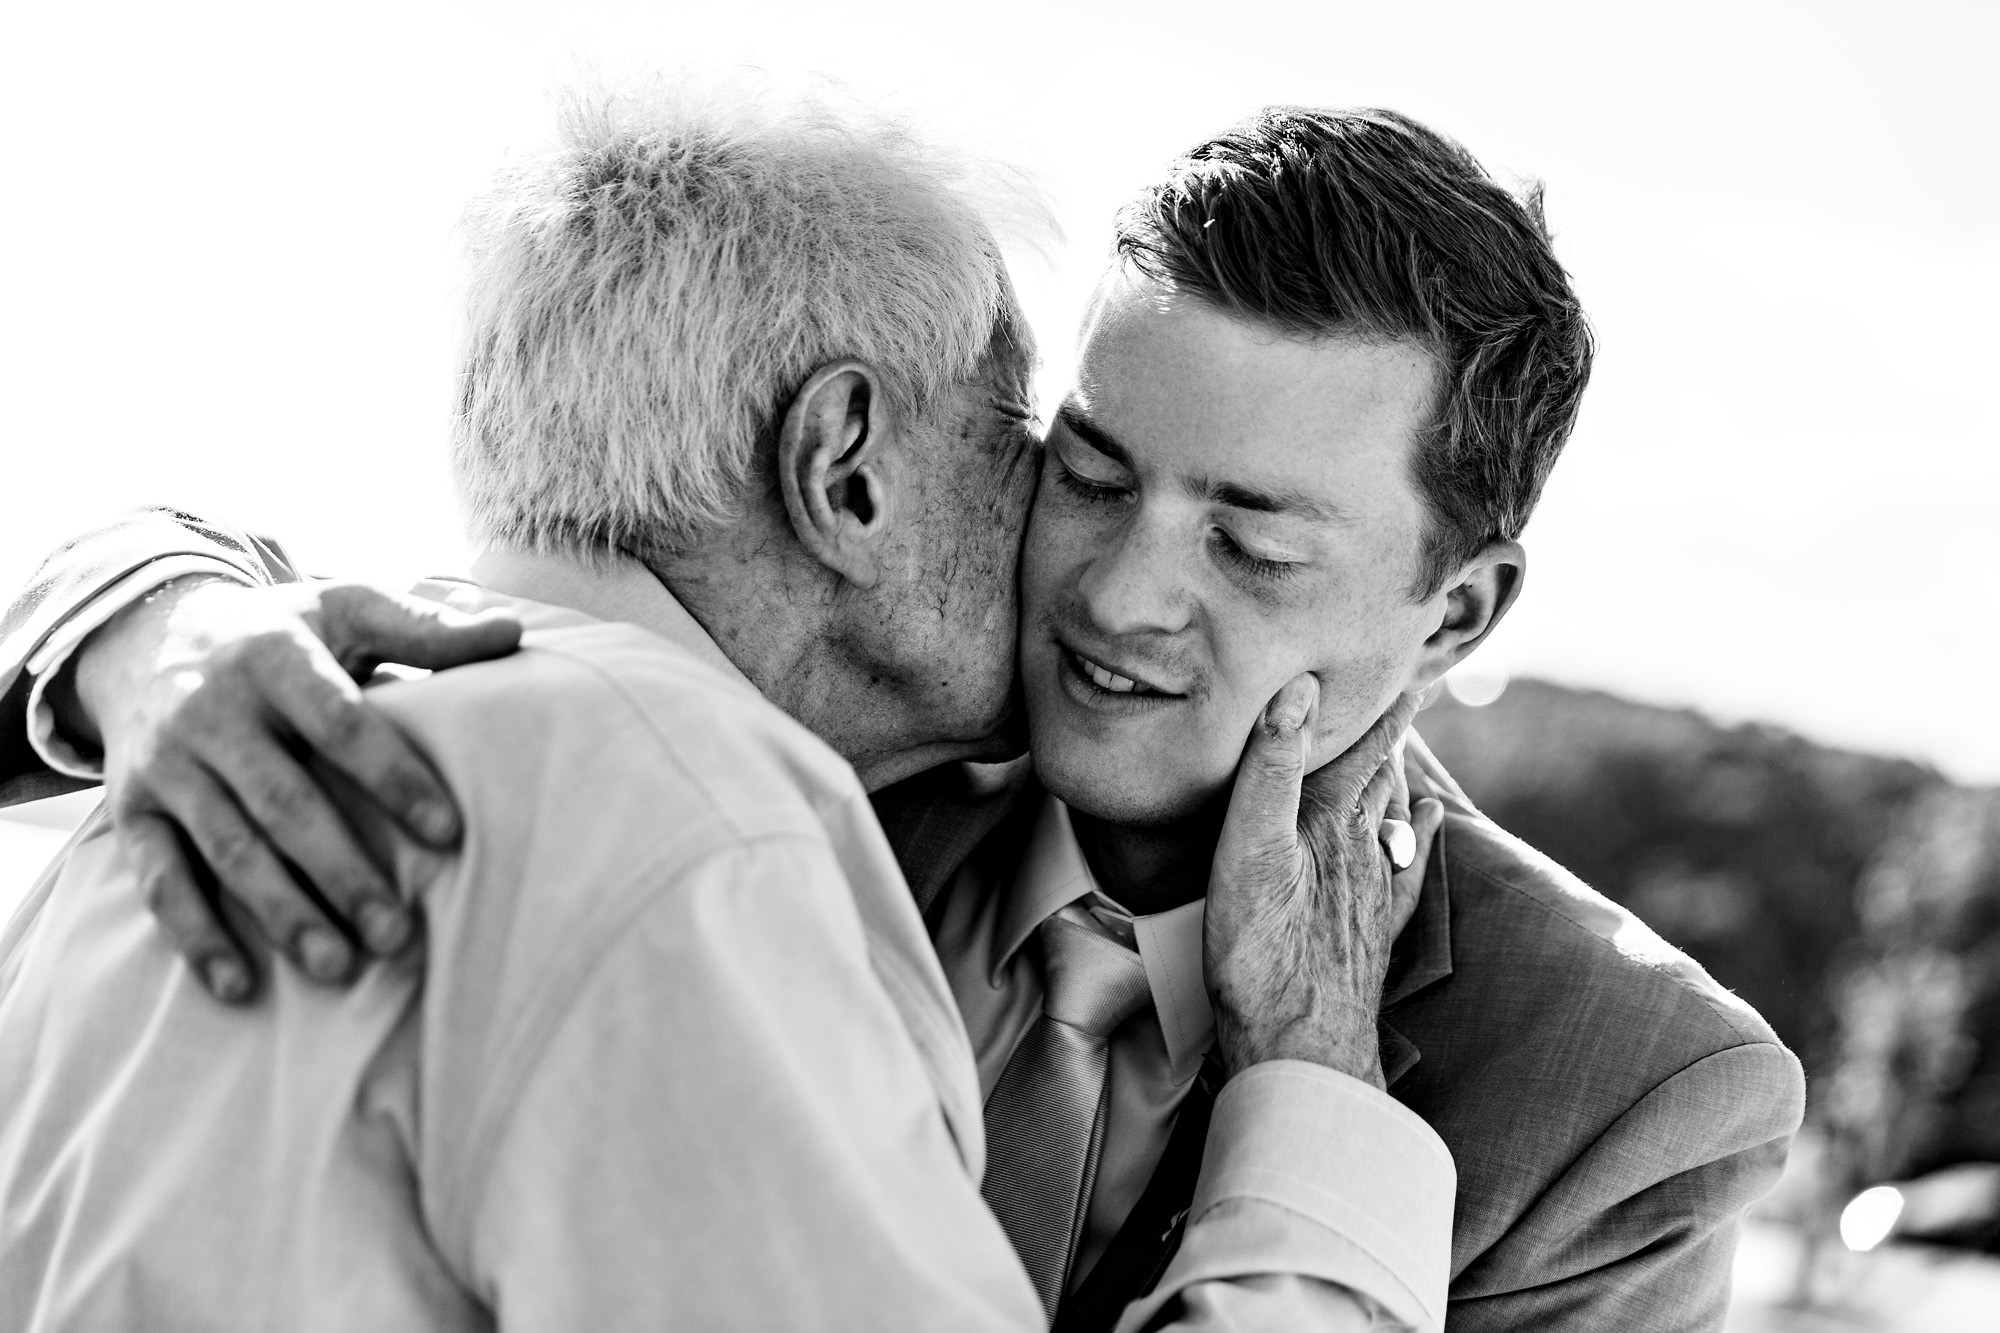 A grandfather kisses the groom on the cheek